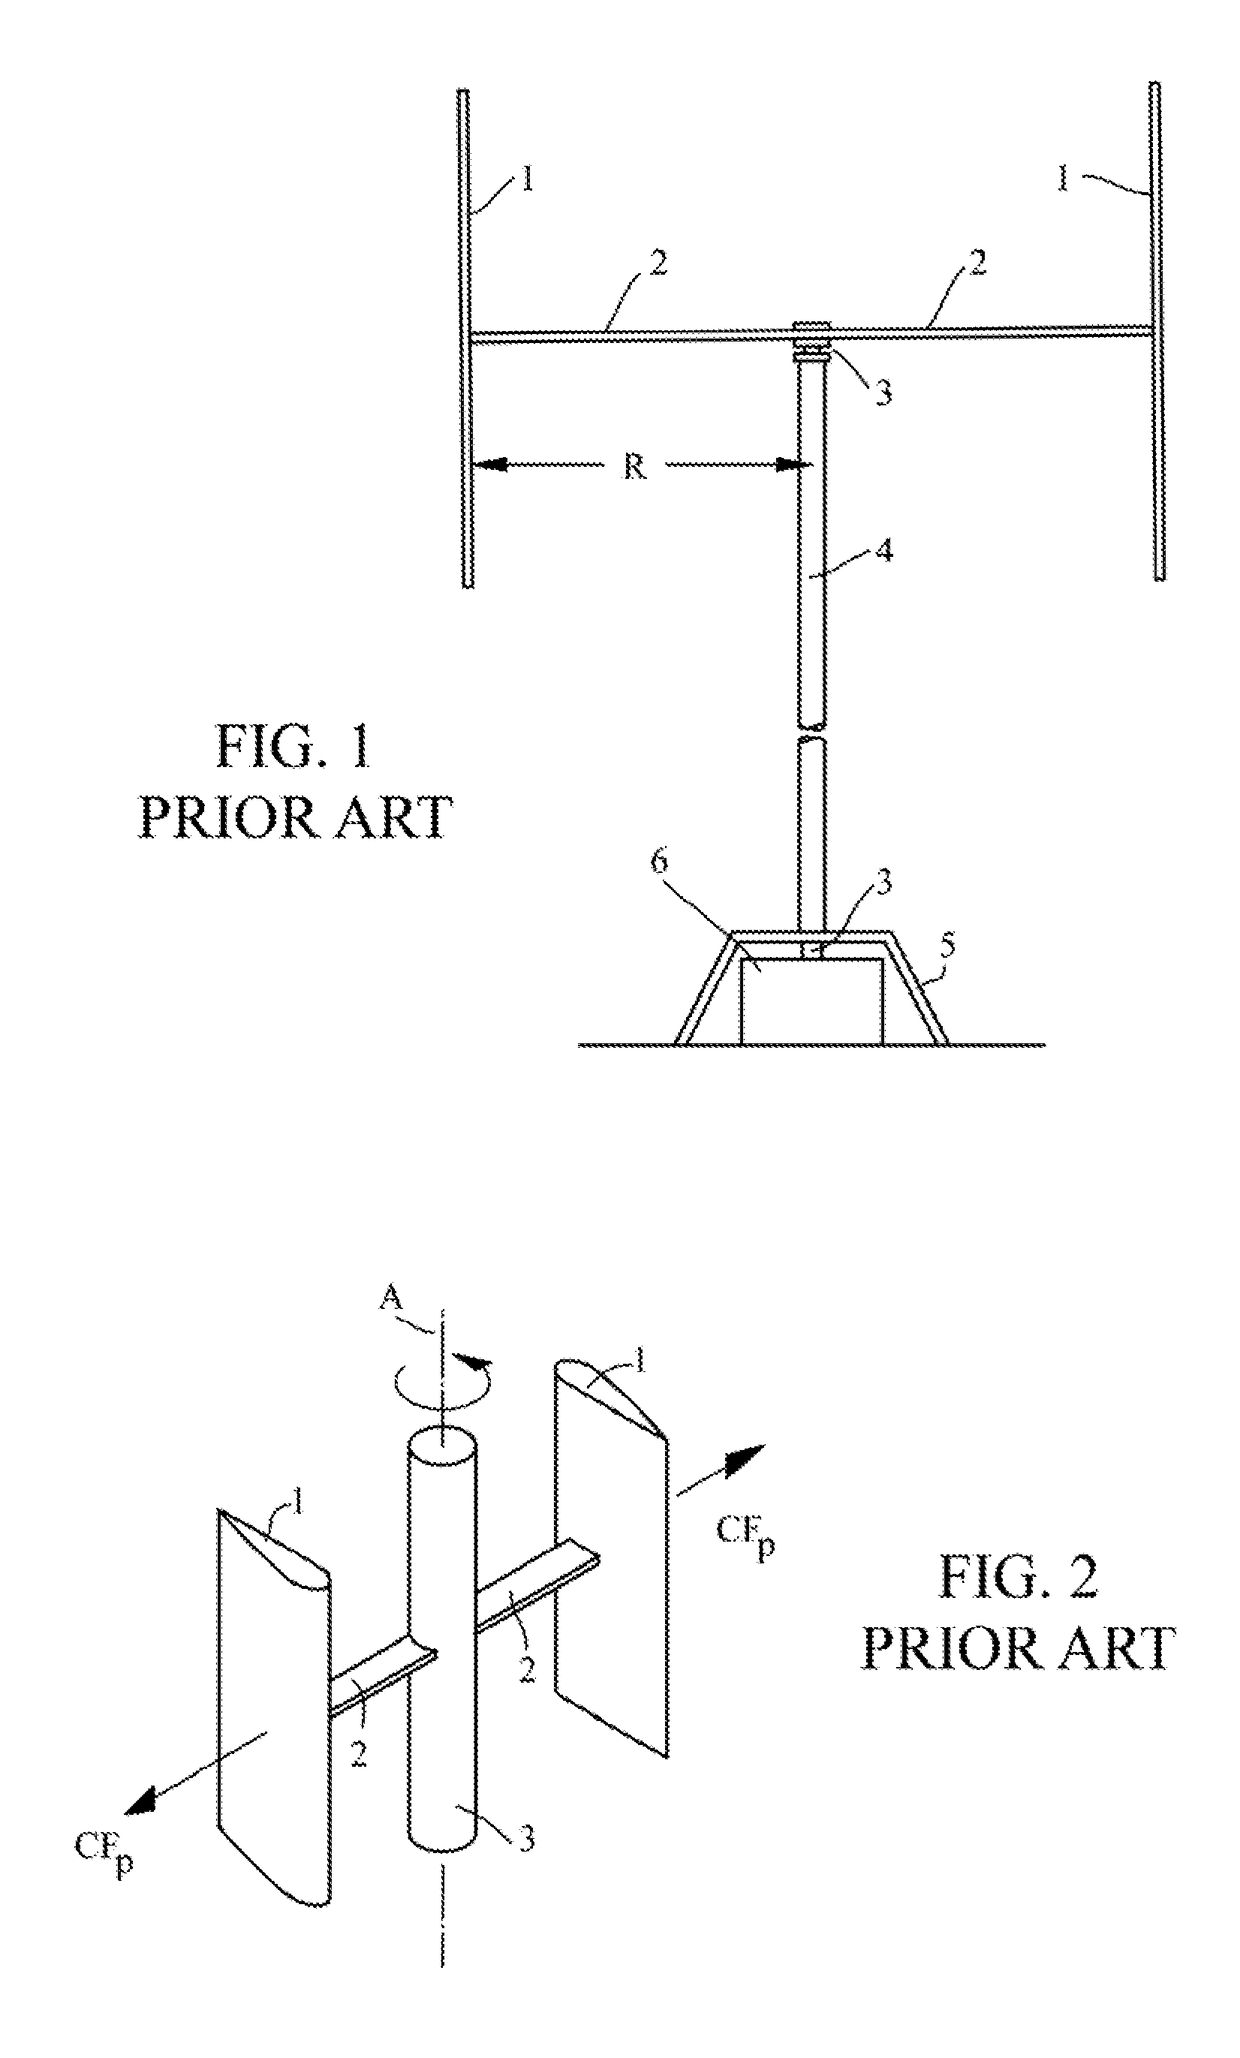 Lift-driven wind turbine with force canceling blade configuration